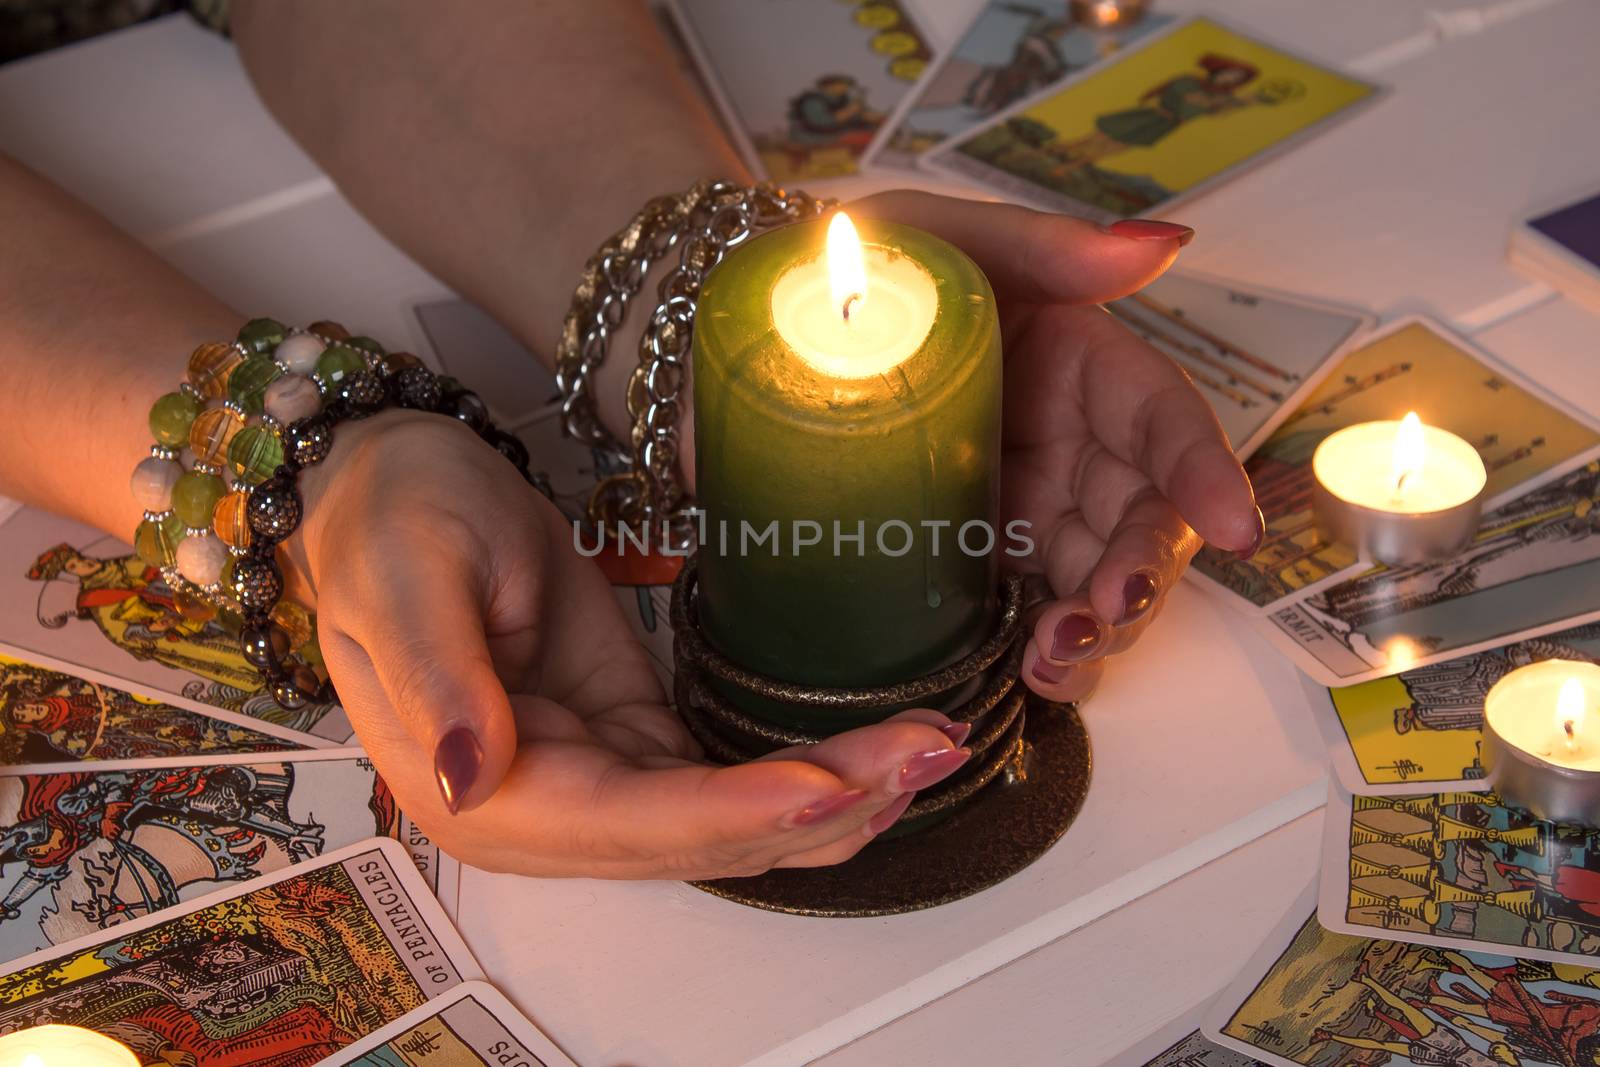 Bangkok,Thailand,March.15.20.Female hands hold a lighted candle in the dark at night. A fortune teller performs a magical. Ritual of enchantment and clairvoyance. Seance and prediction of the future